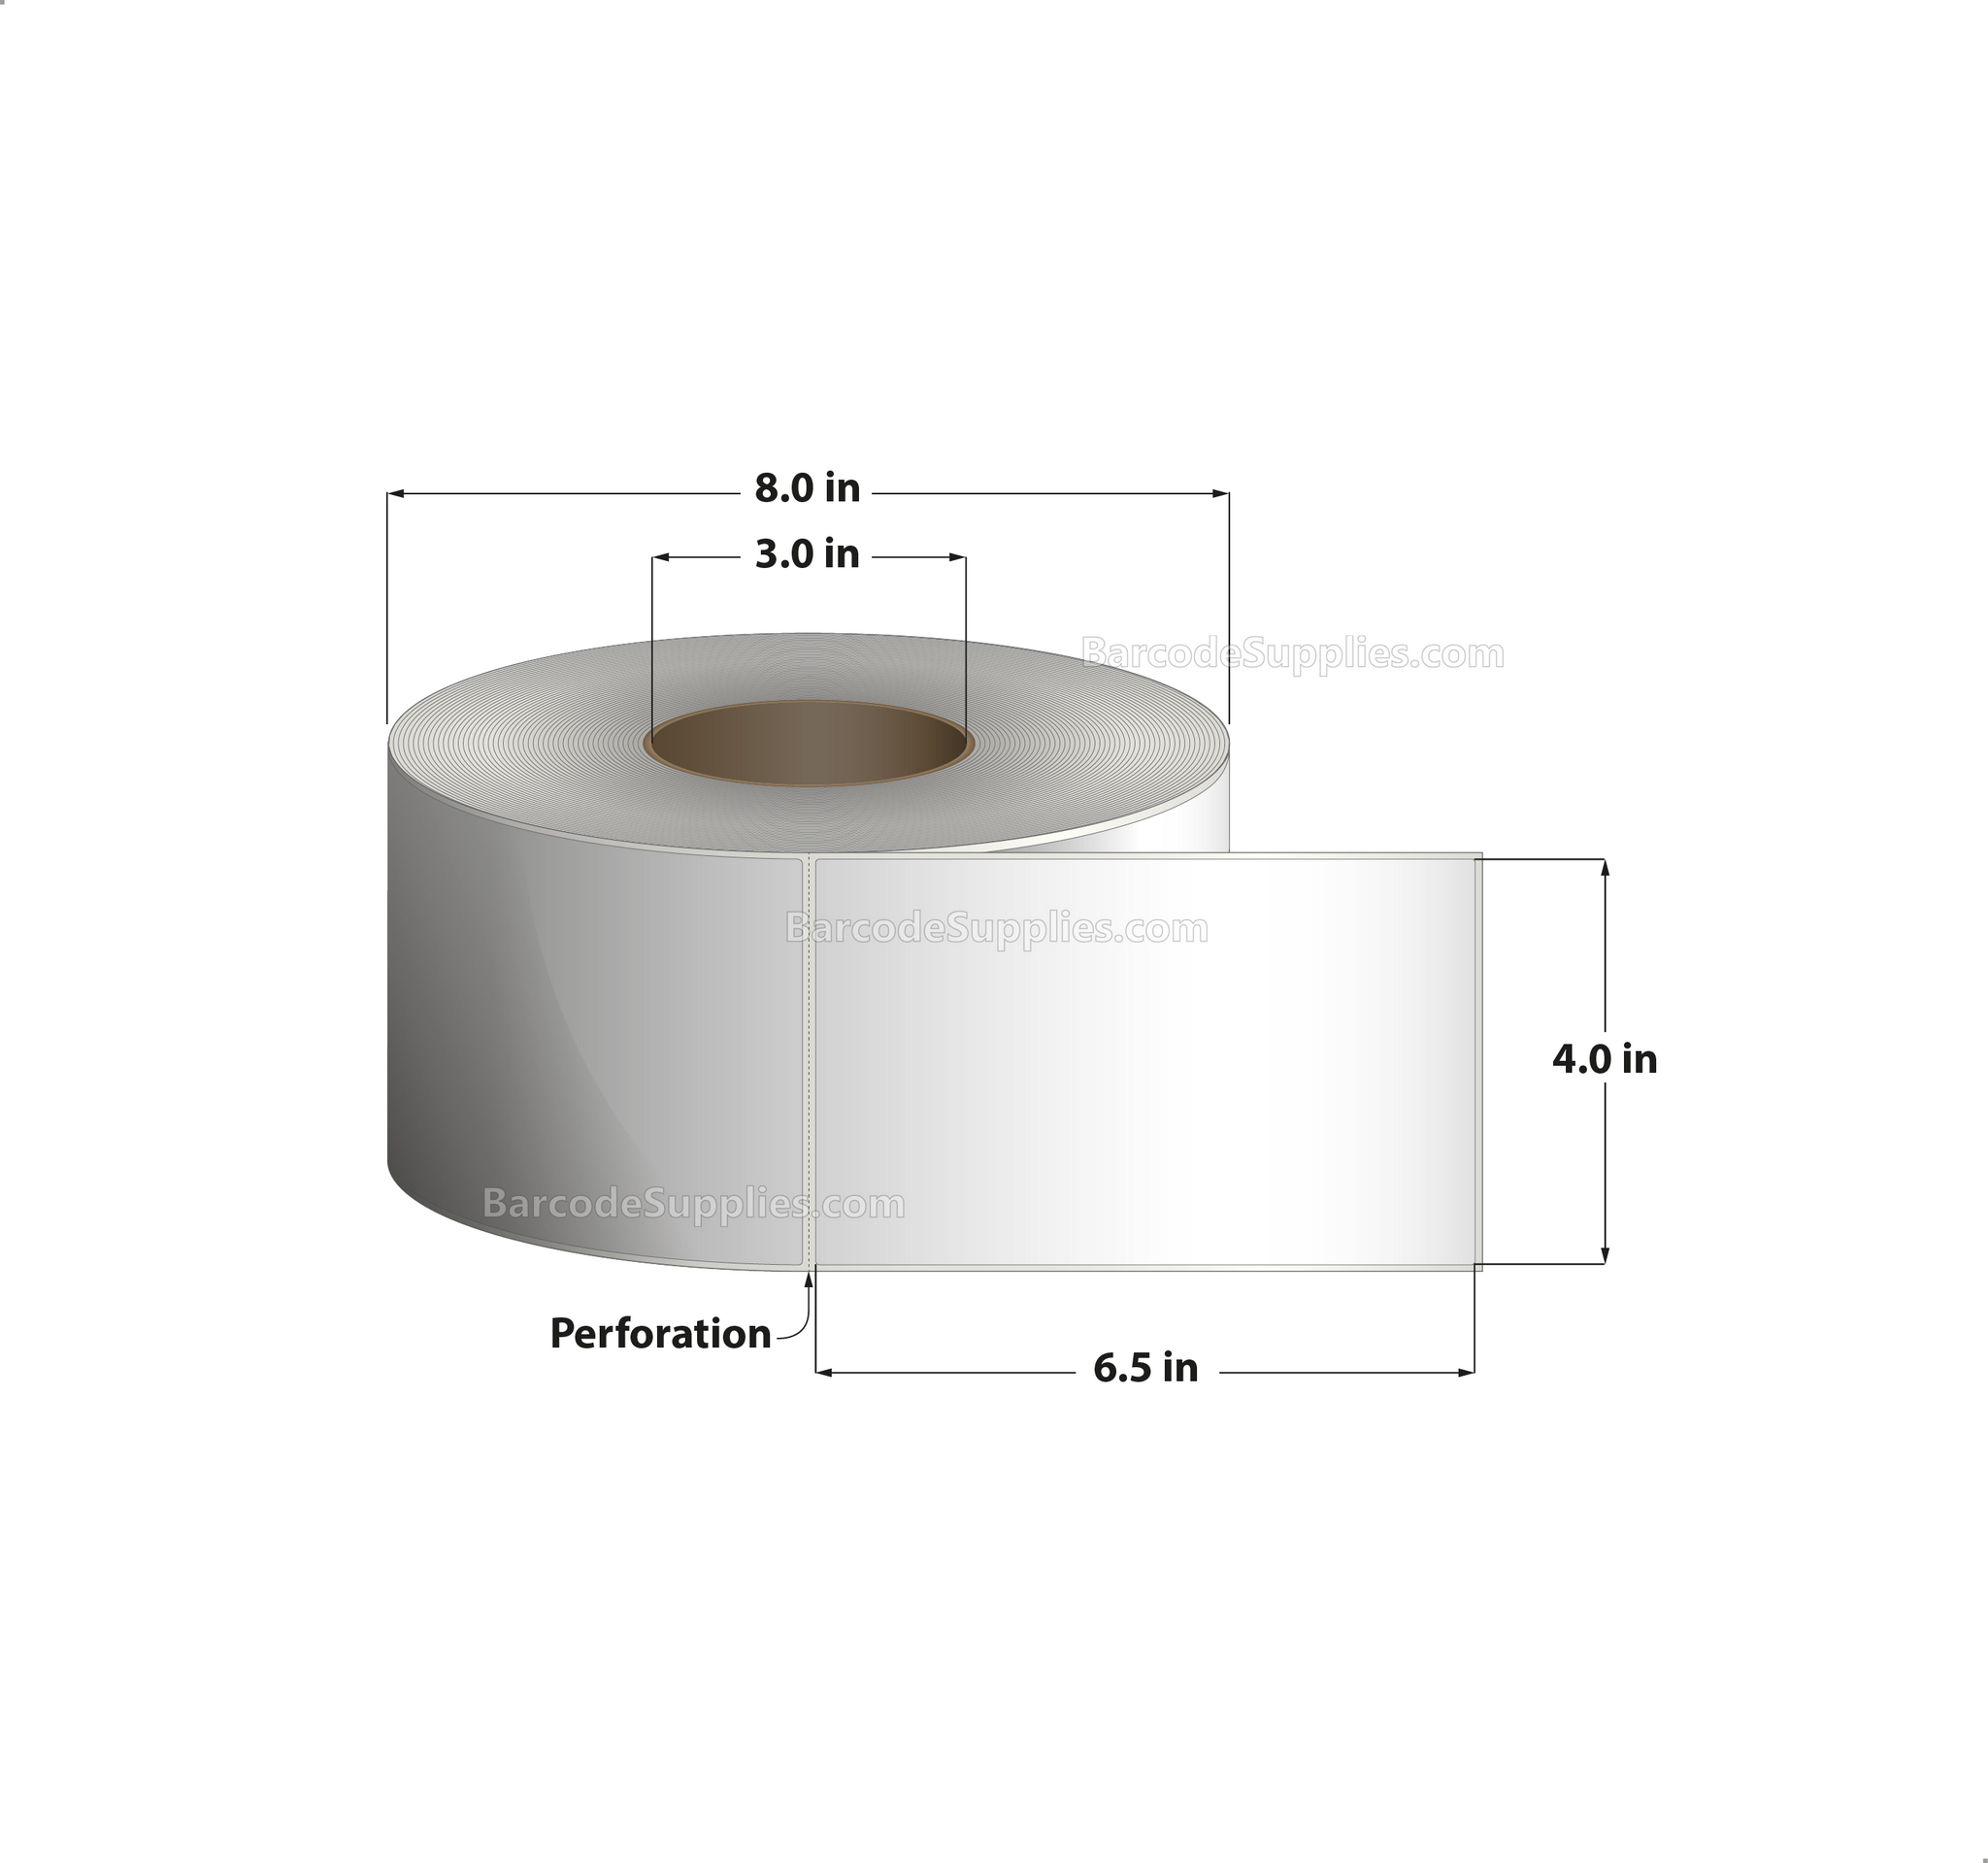 4 x 6.5 Direct Thermal White Labels With Permanent Acrylic Adhesive - Perforated - 900 Labels Per Roll - Carton Of 4 Rolls - 3600 Labels Total - MPN: DT465-1P